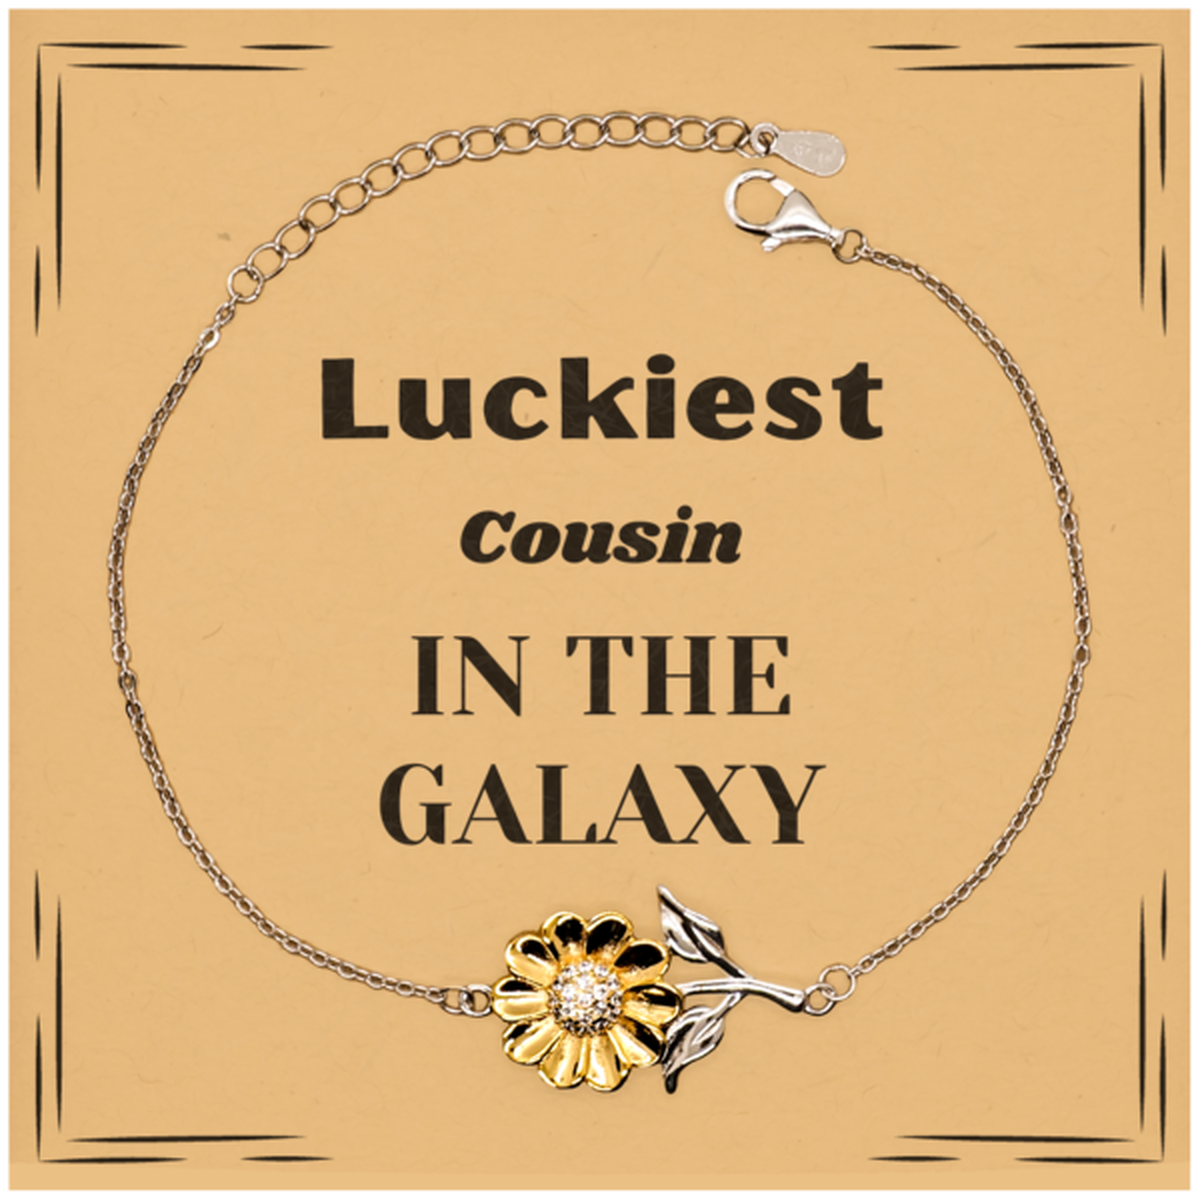 Luckiest Cousin in the Galaxy, To My Cousin Message Card Gifts, Christmas Cousin Sunflower Bracelet Gifts, X-mas Birthday Unique Gifts For Cousin Men Women